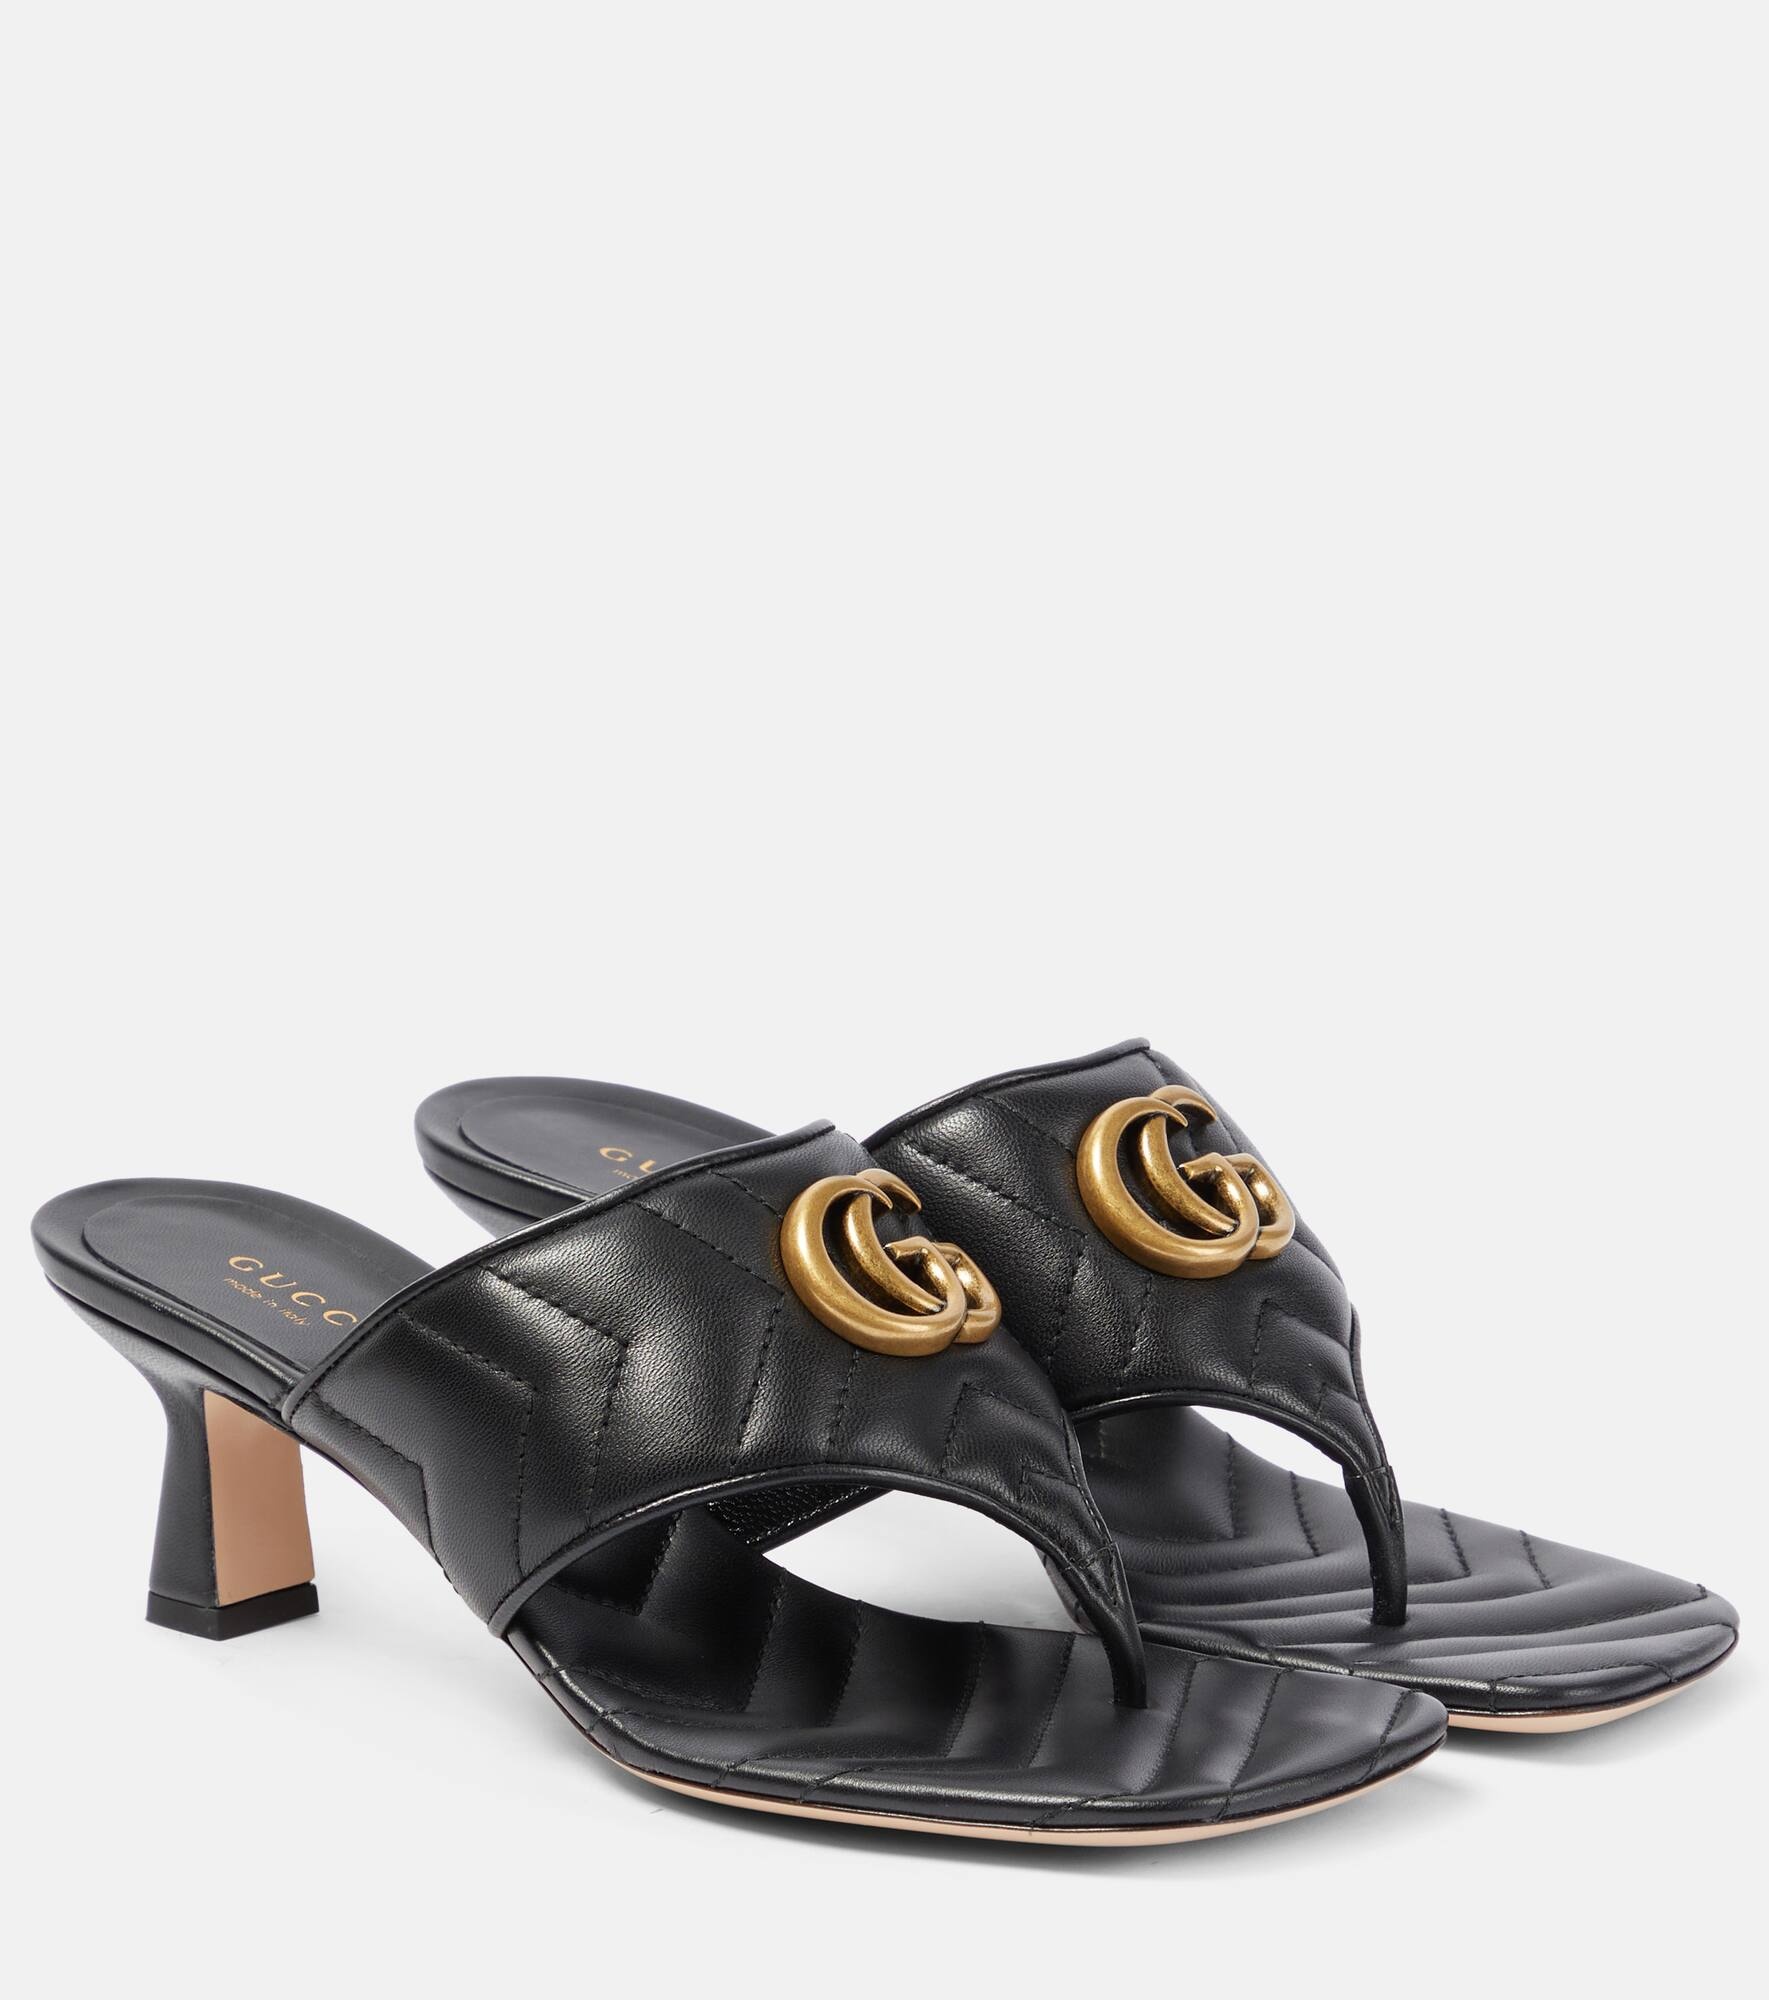 GG Marmont 55 leather thong sandals - 1